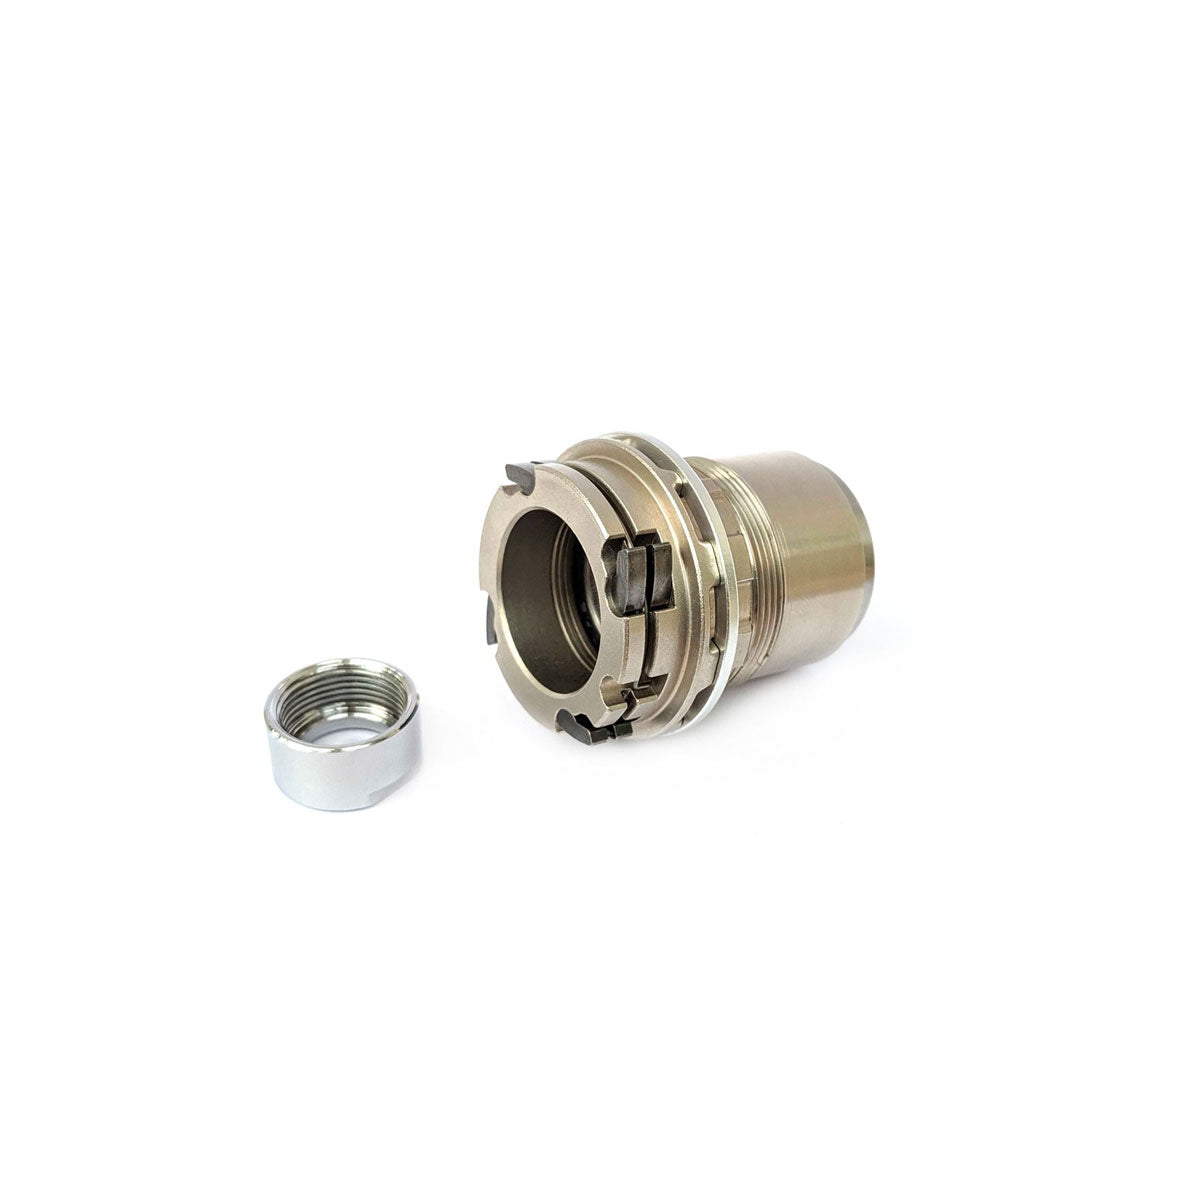 XDR/XD Freehub Body for KICKR and KICKR Core